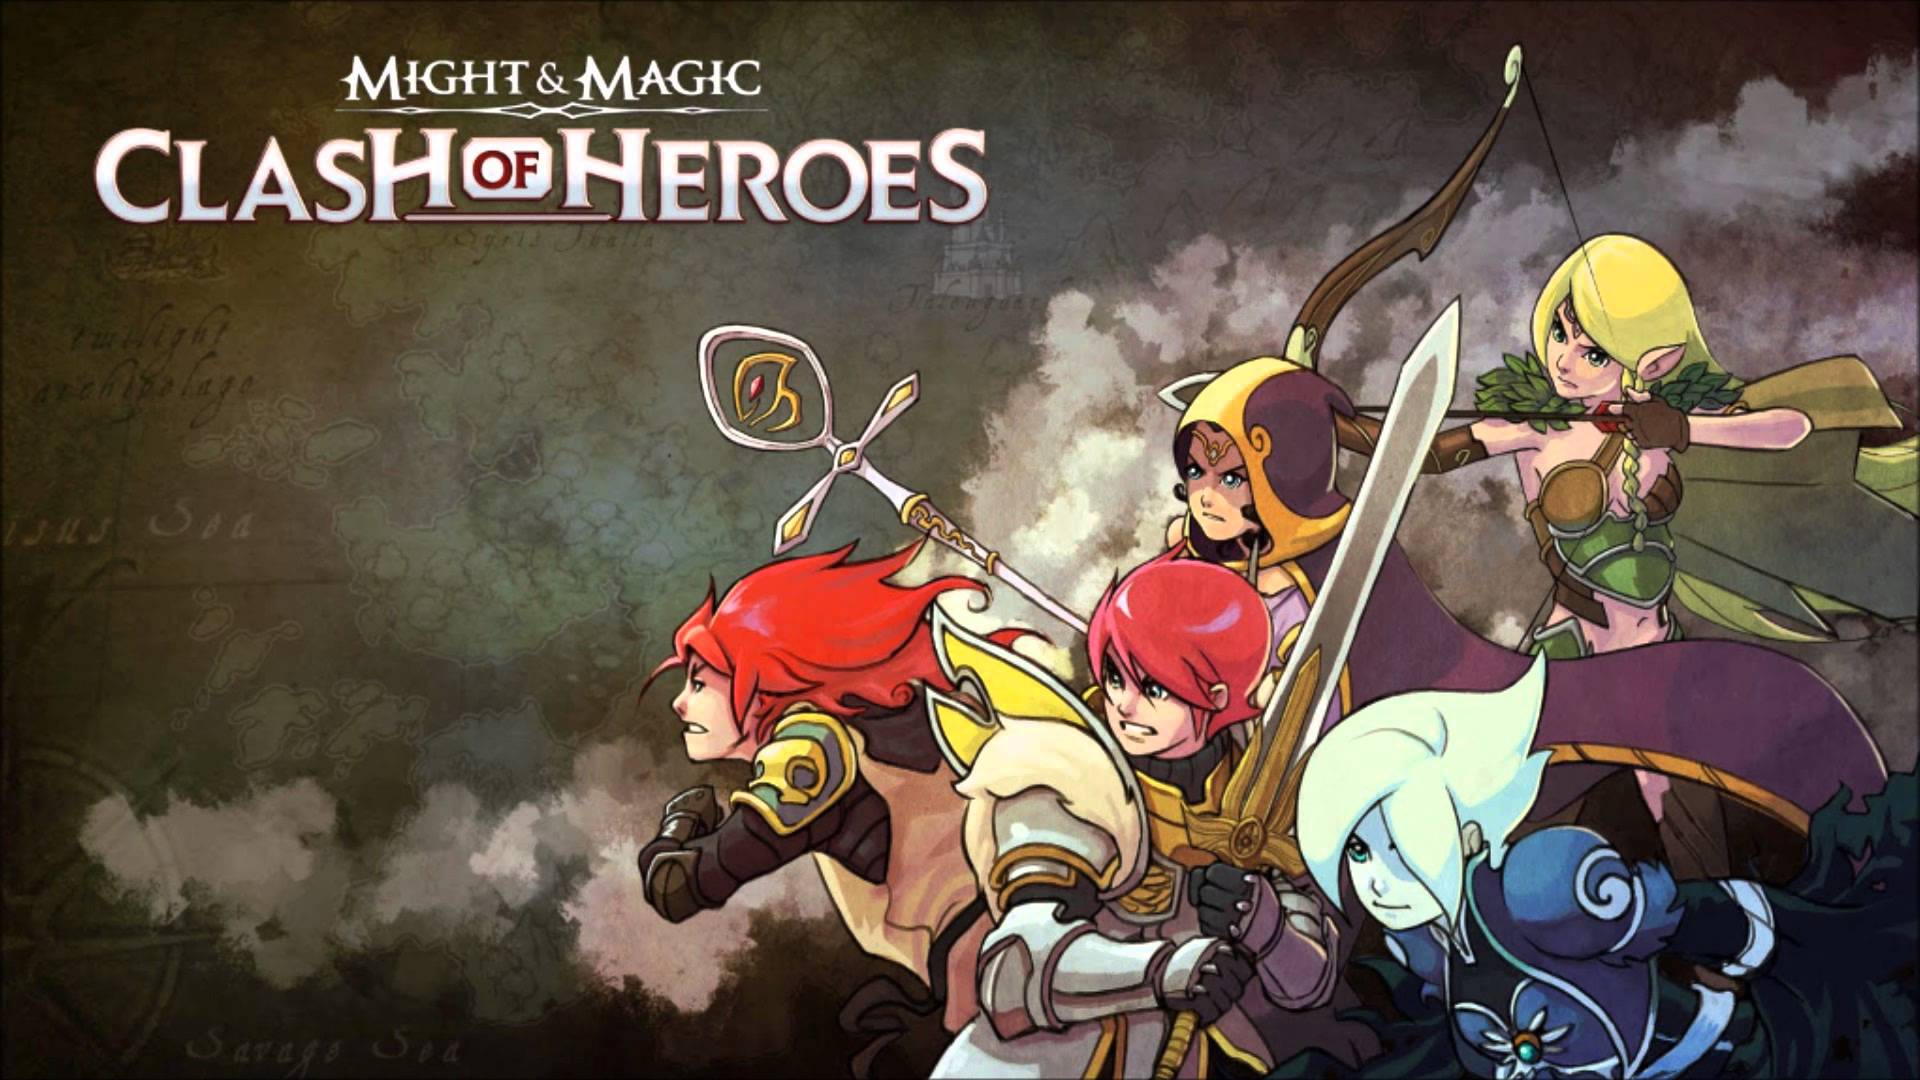 1920x1080 > Might & Magic: Clash Of Heroes Wallpapers